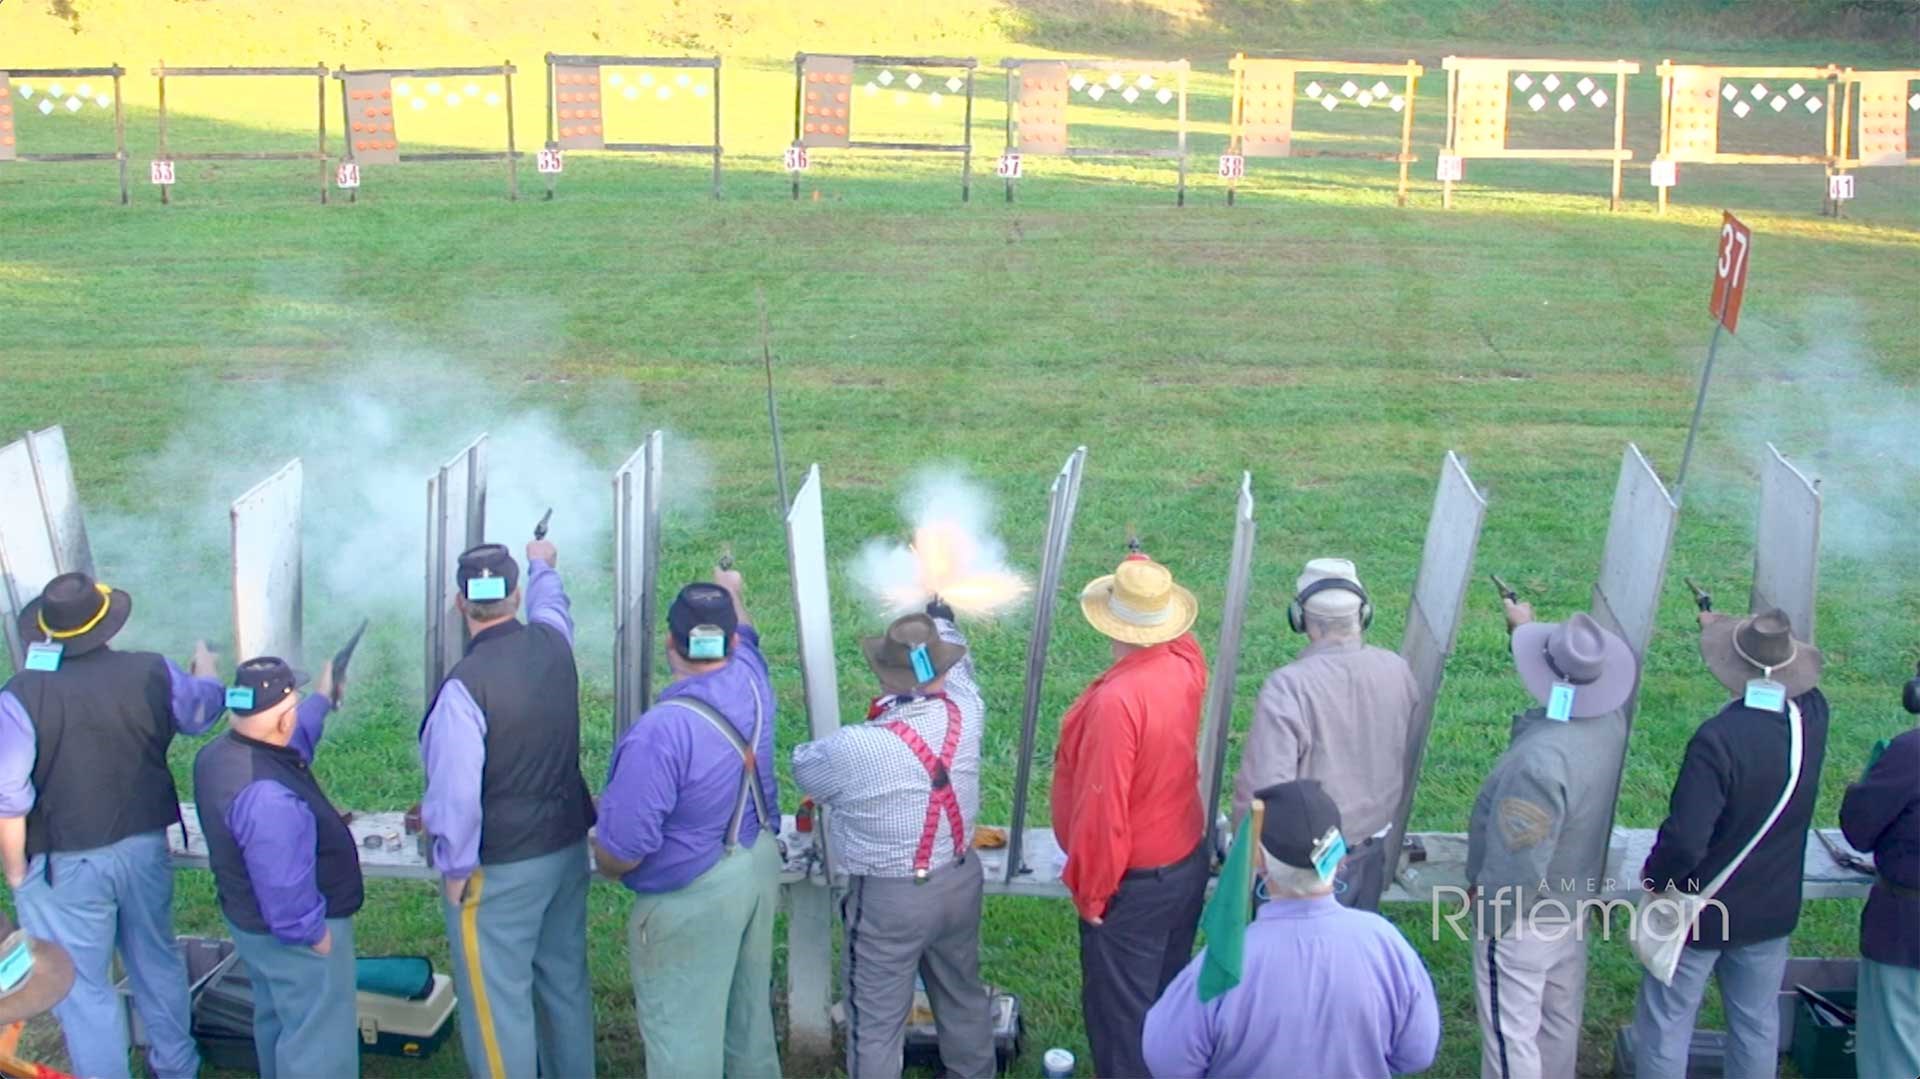 Men on the competition line, aiming revolvers at hanging targets on a green ground.